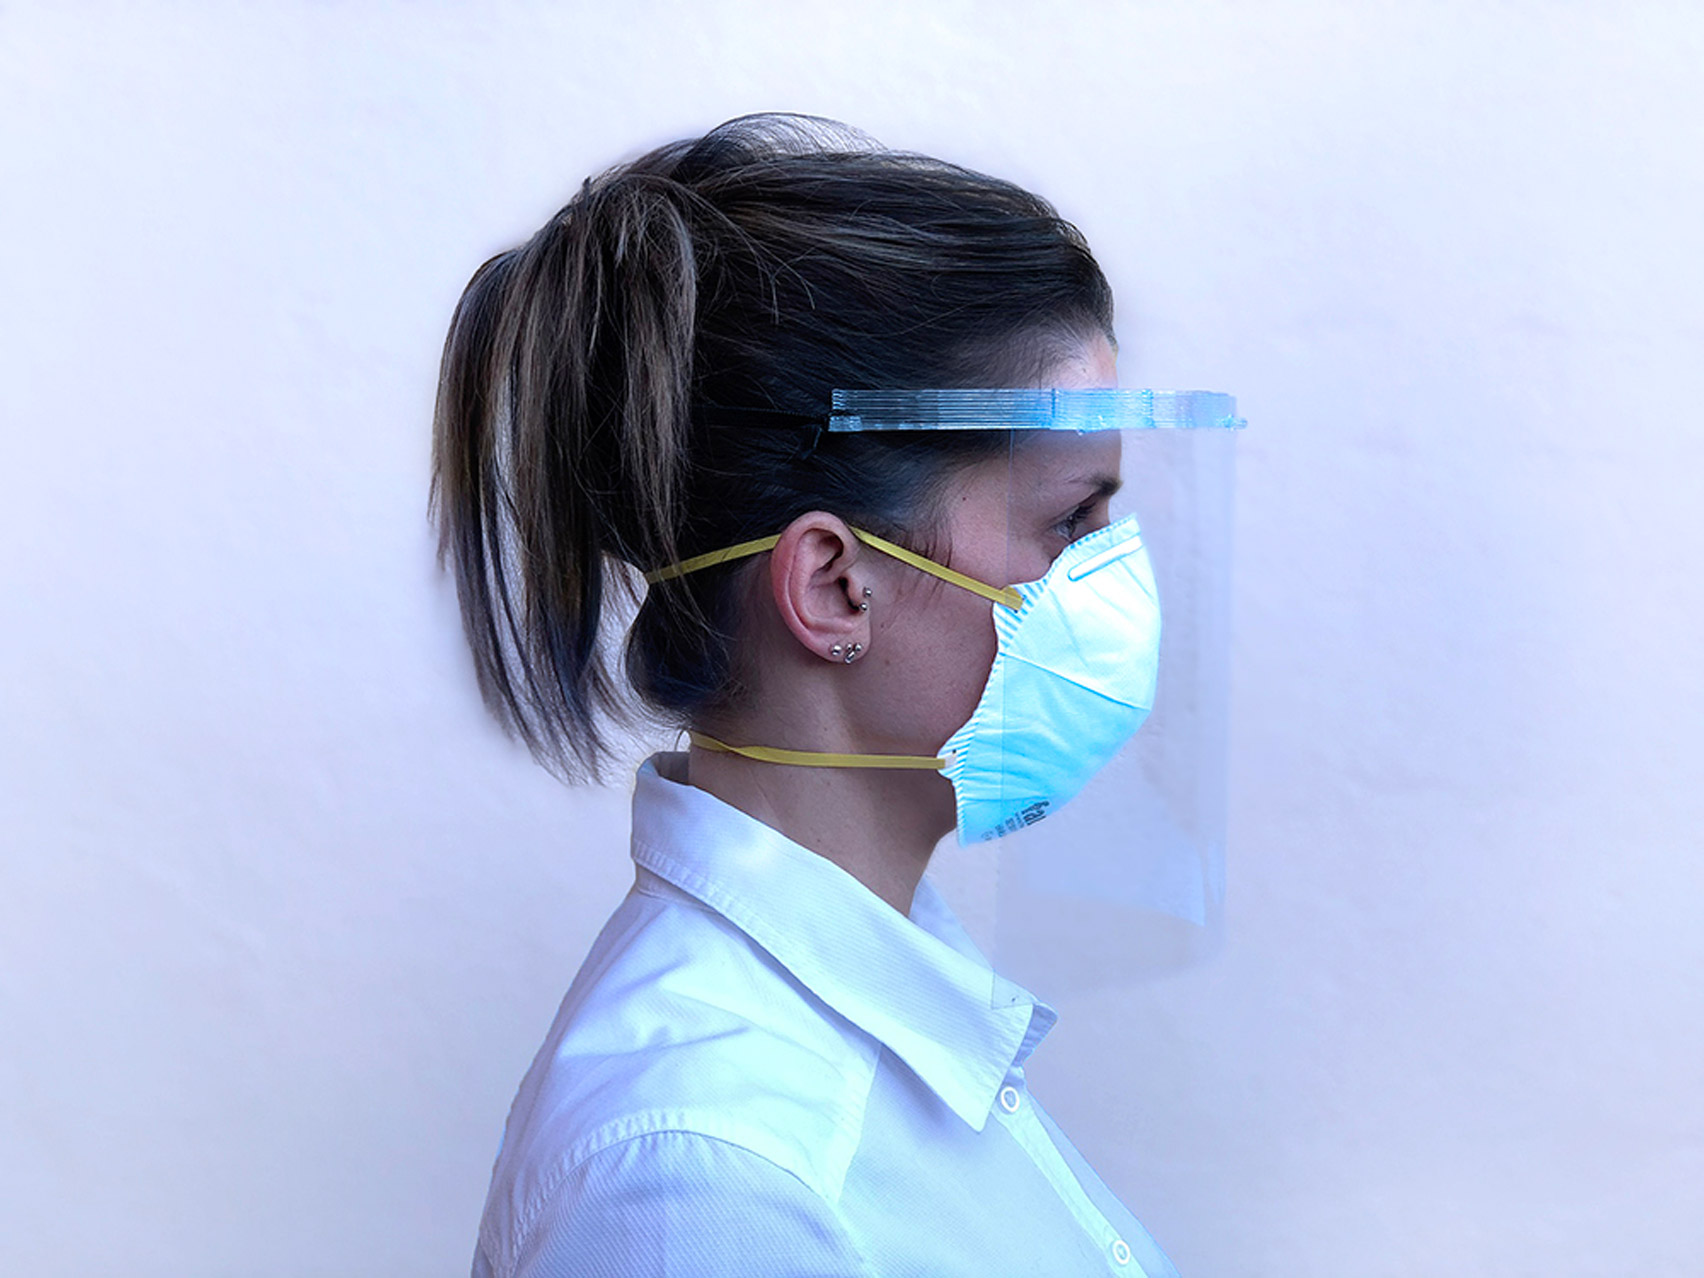 3D-printed face shields can protect medical coronavirus